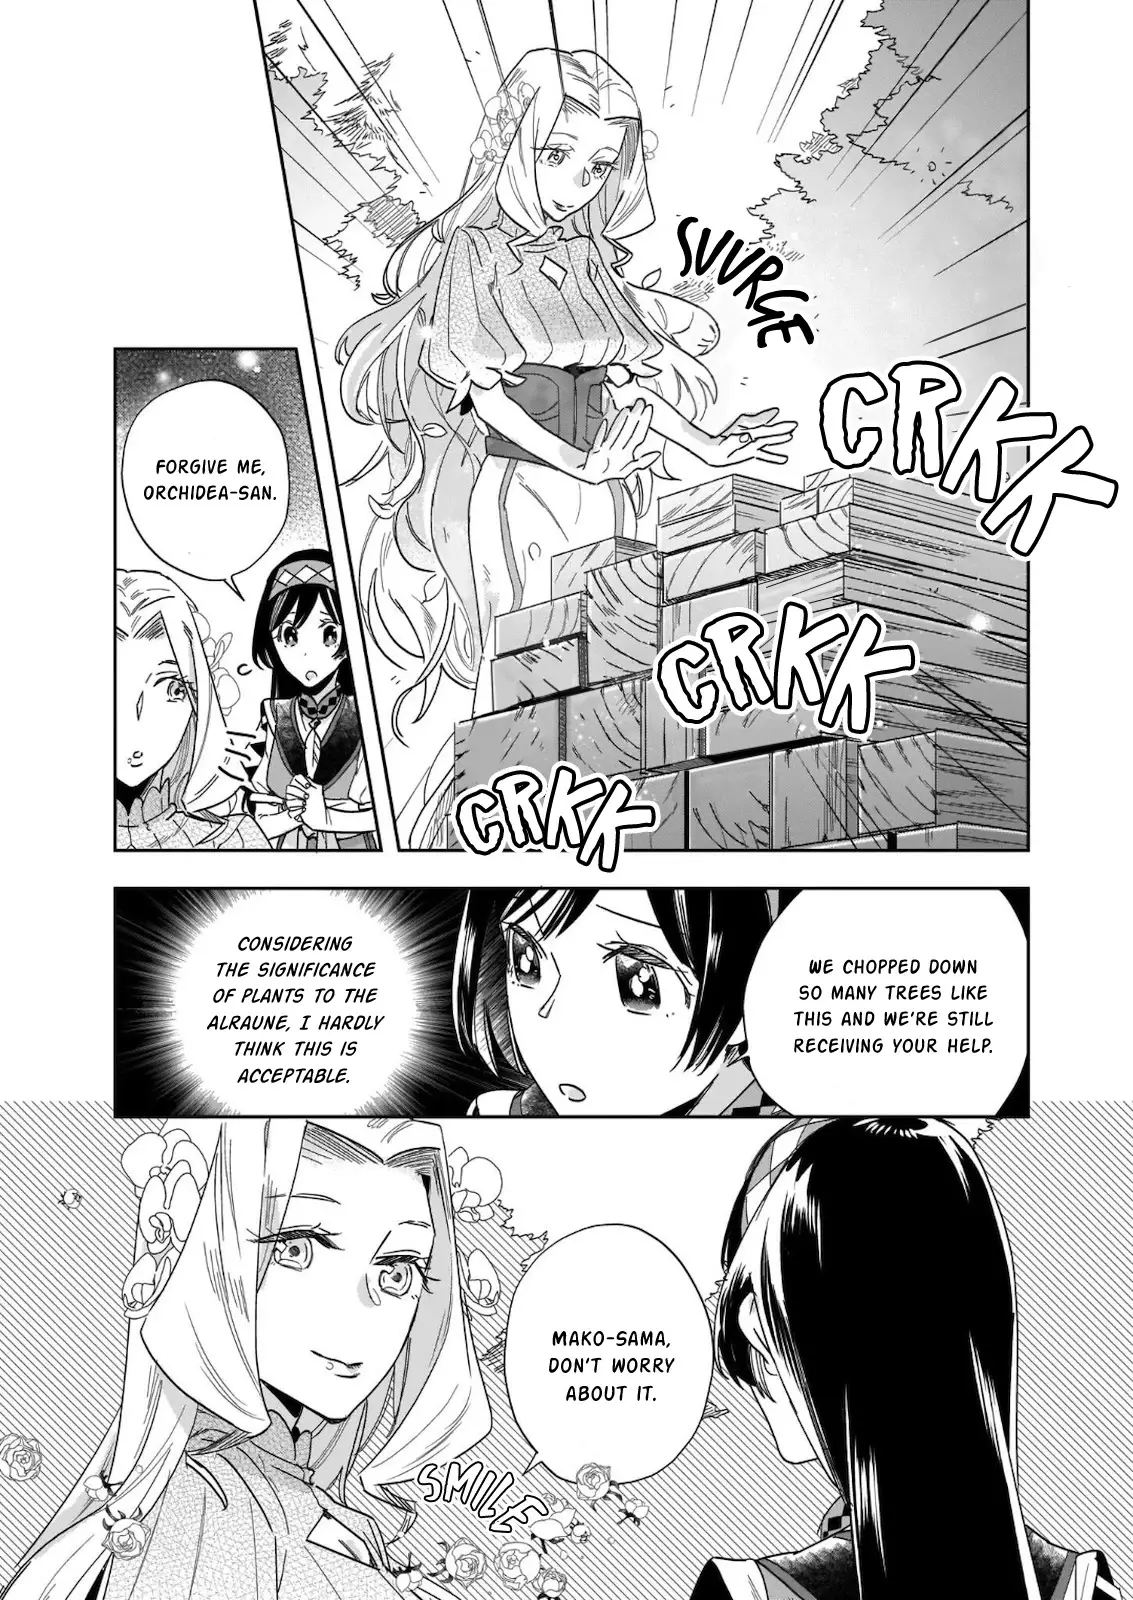 Home Centre Sales Clerk’S Life In Another World - 7 page 19-0f5aa7f7